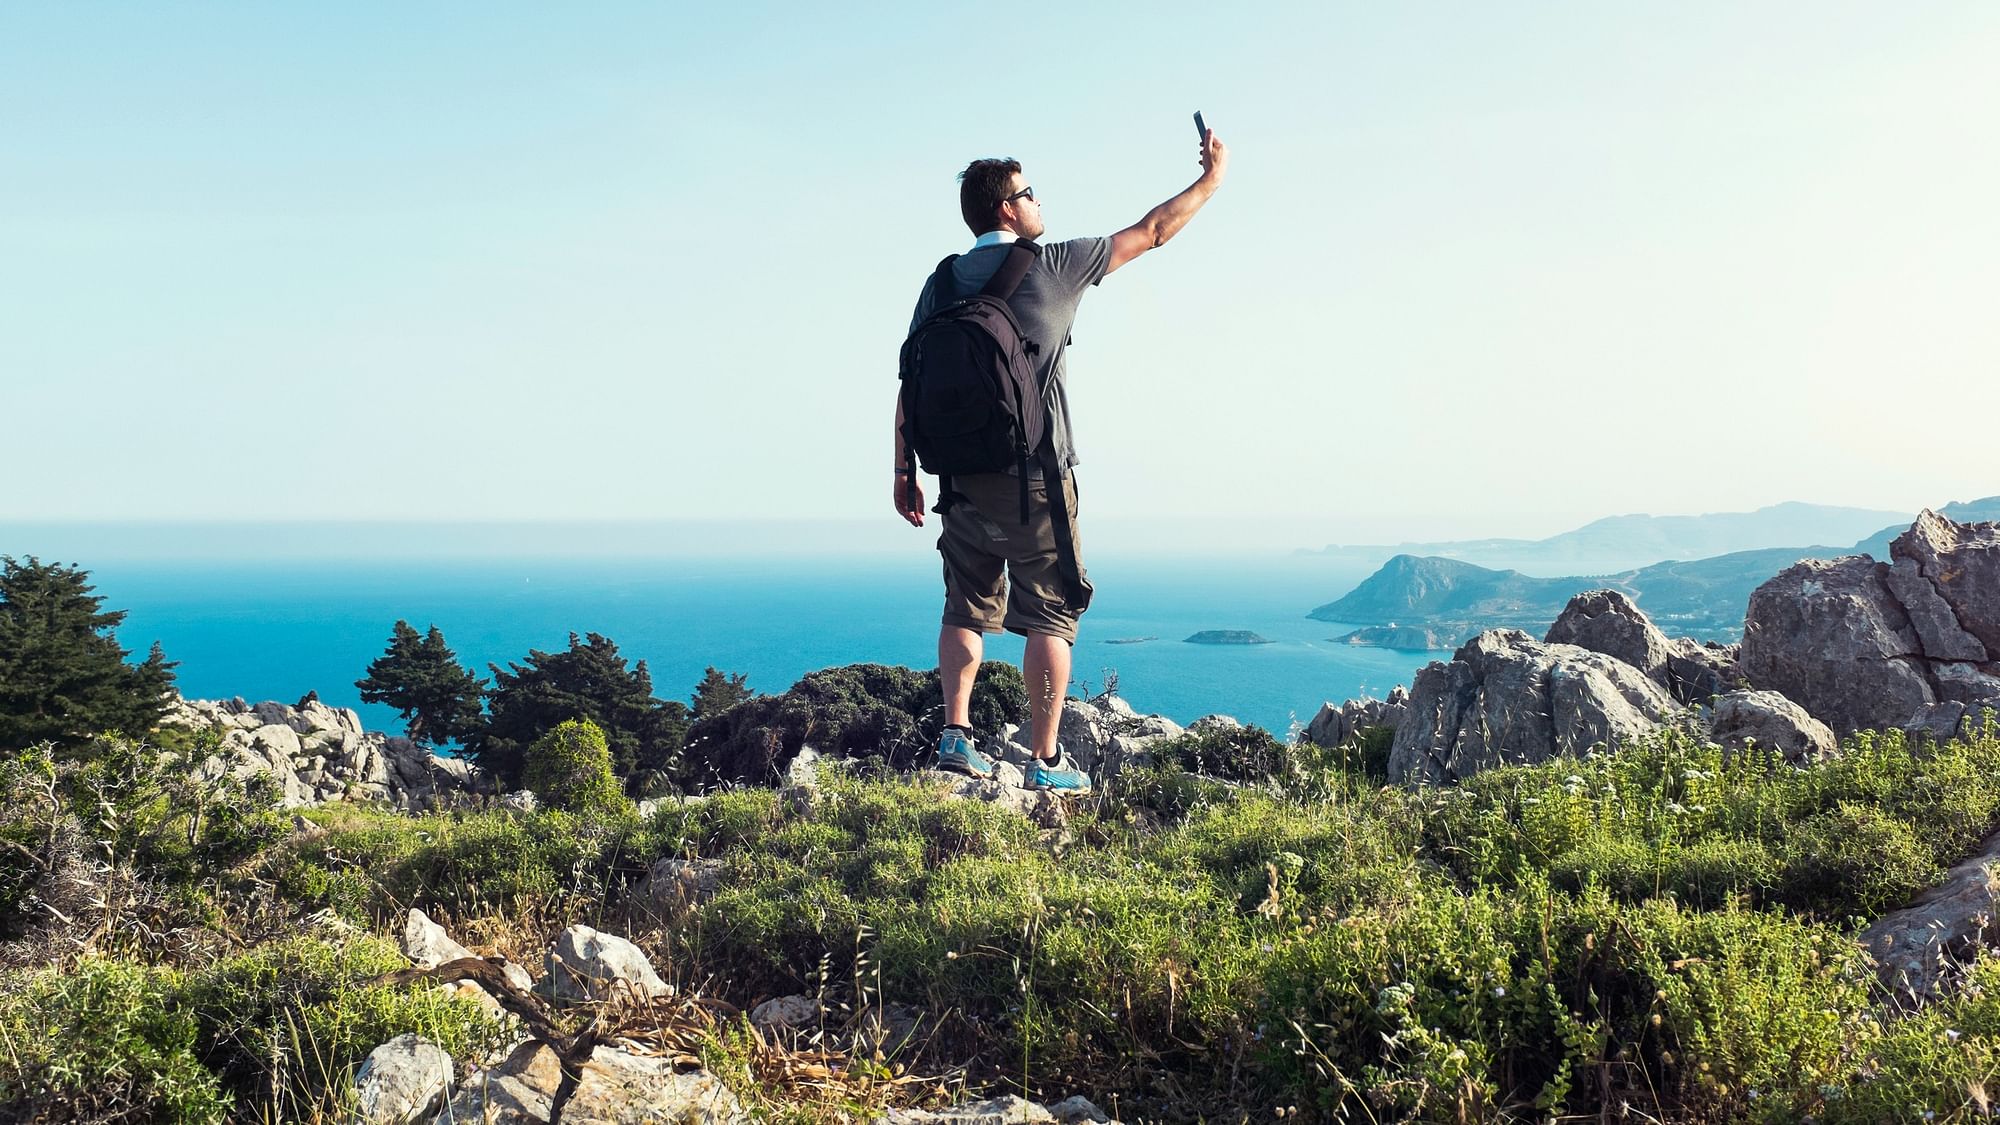 

He who shall roam freely needs a great data plan. Photo: iStock